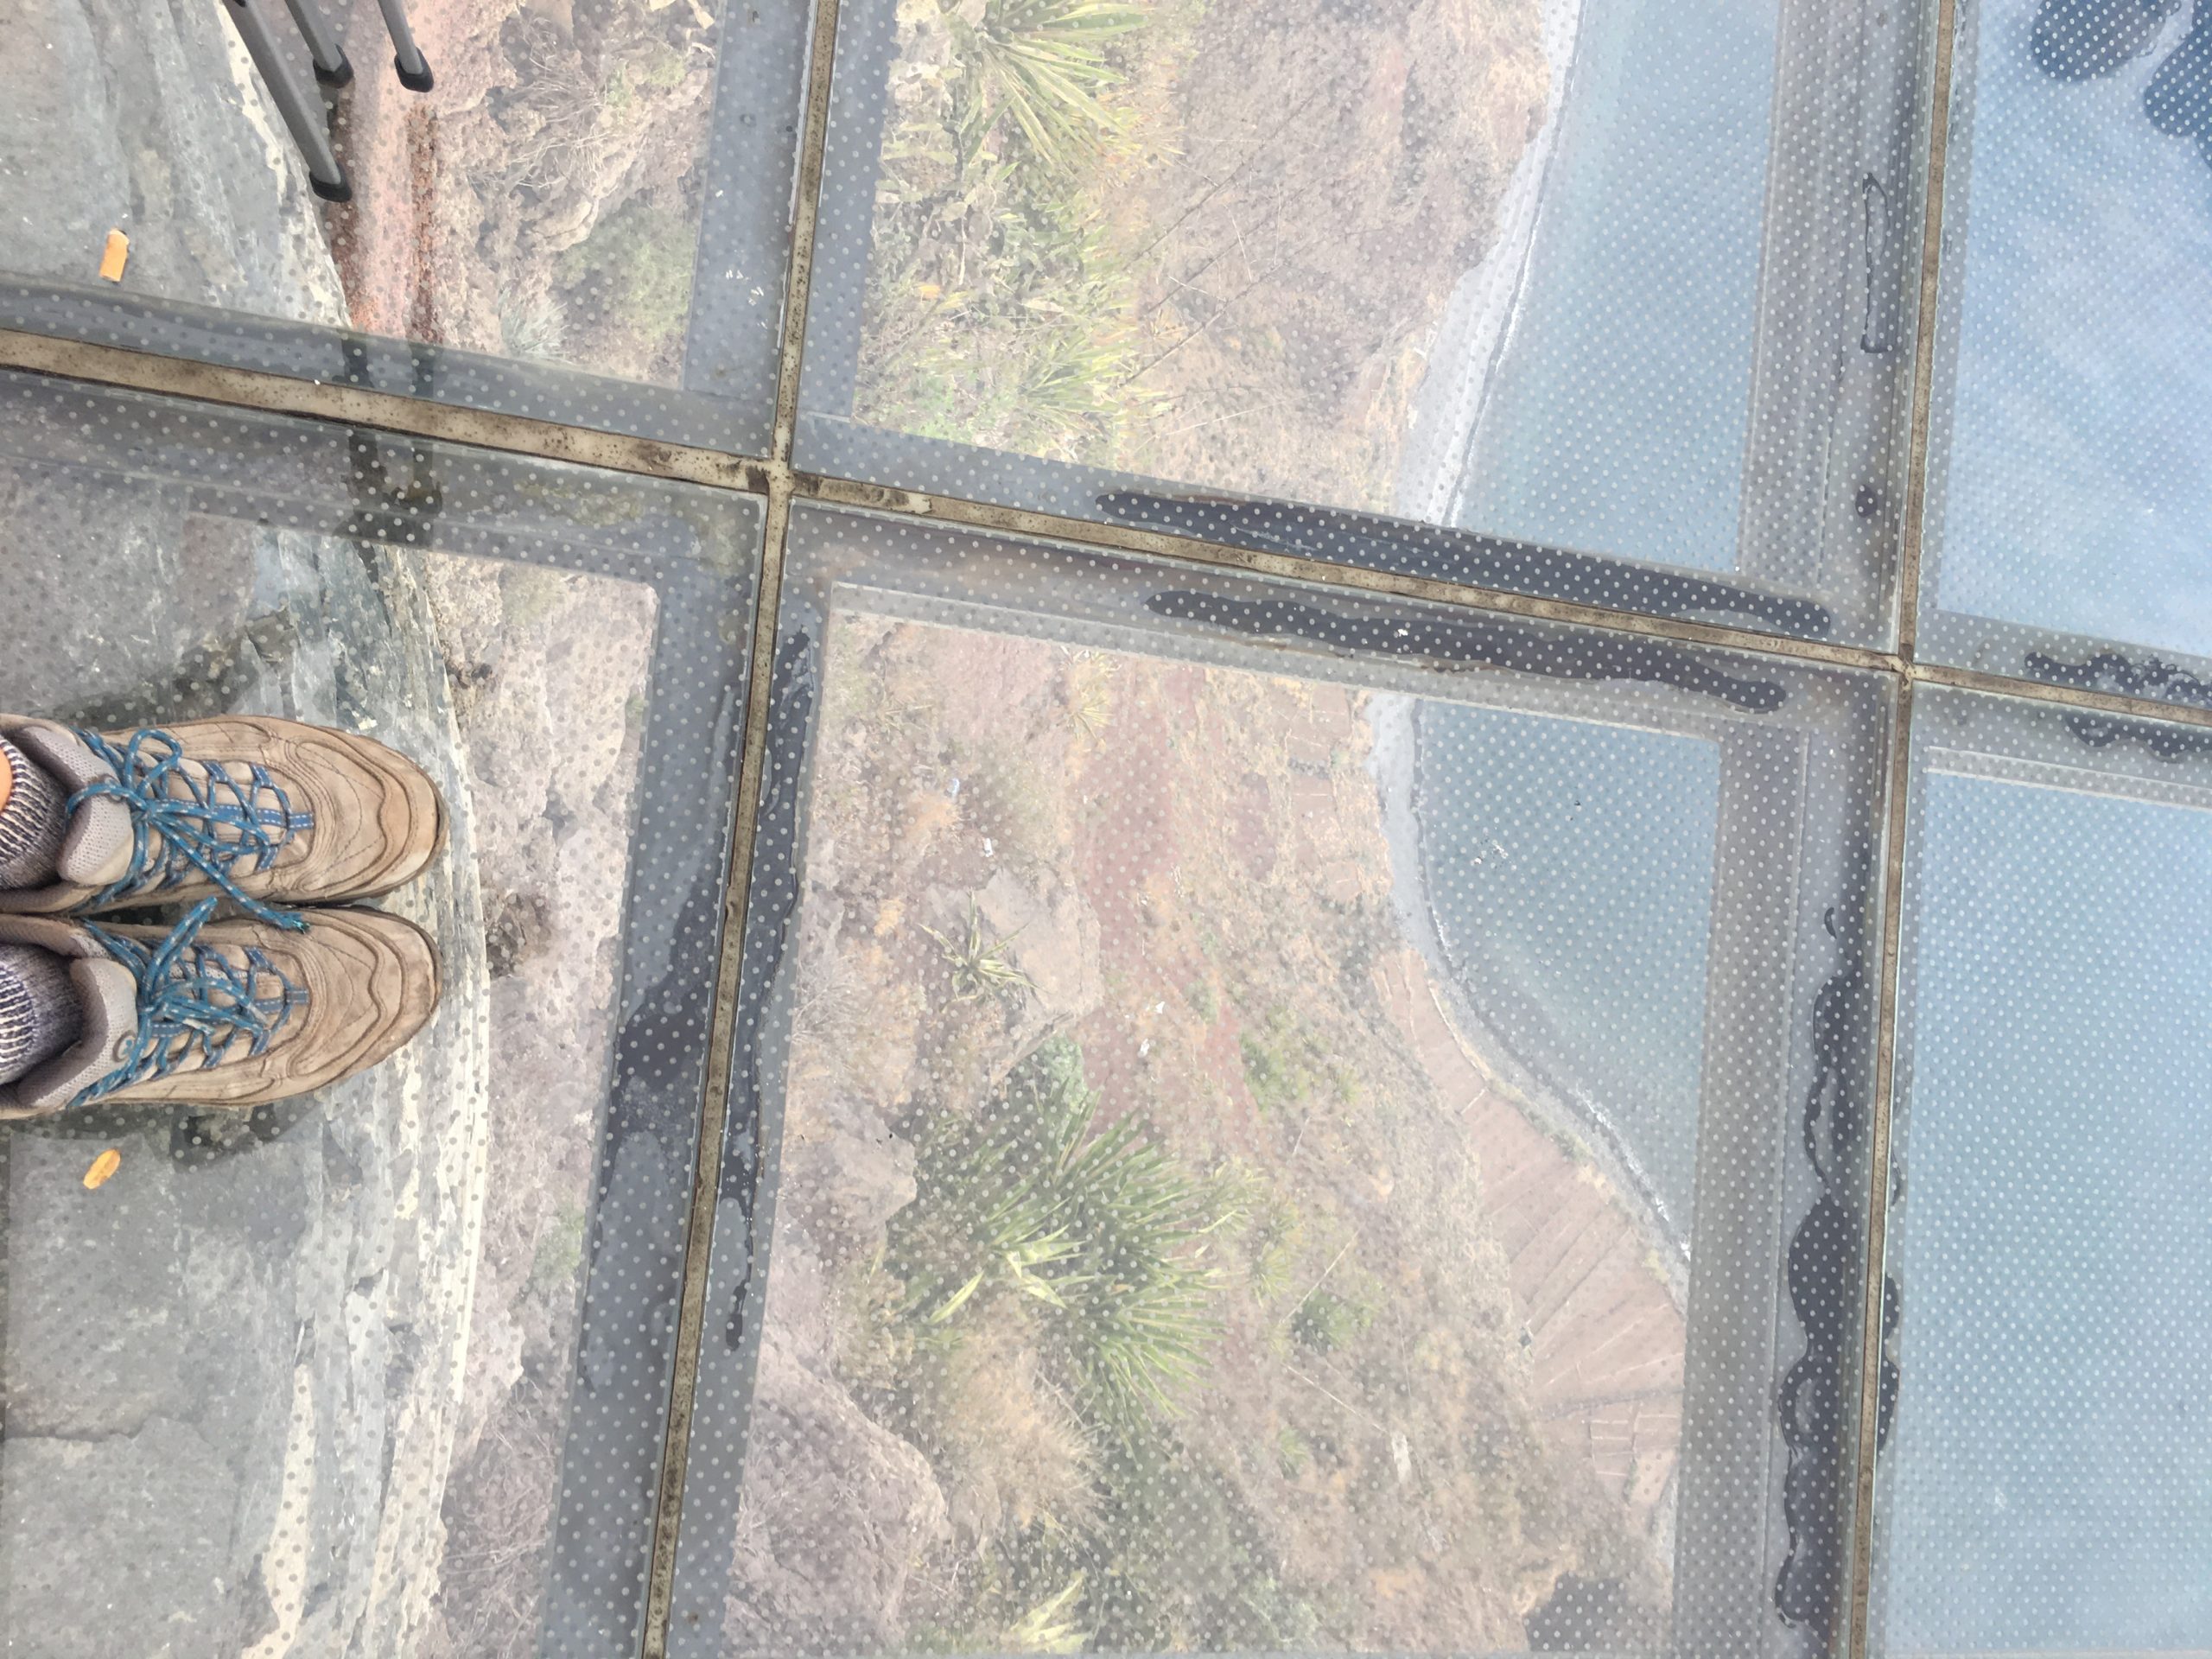 Looking down from the glass skywalk at Cabo Girao